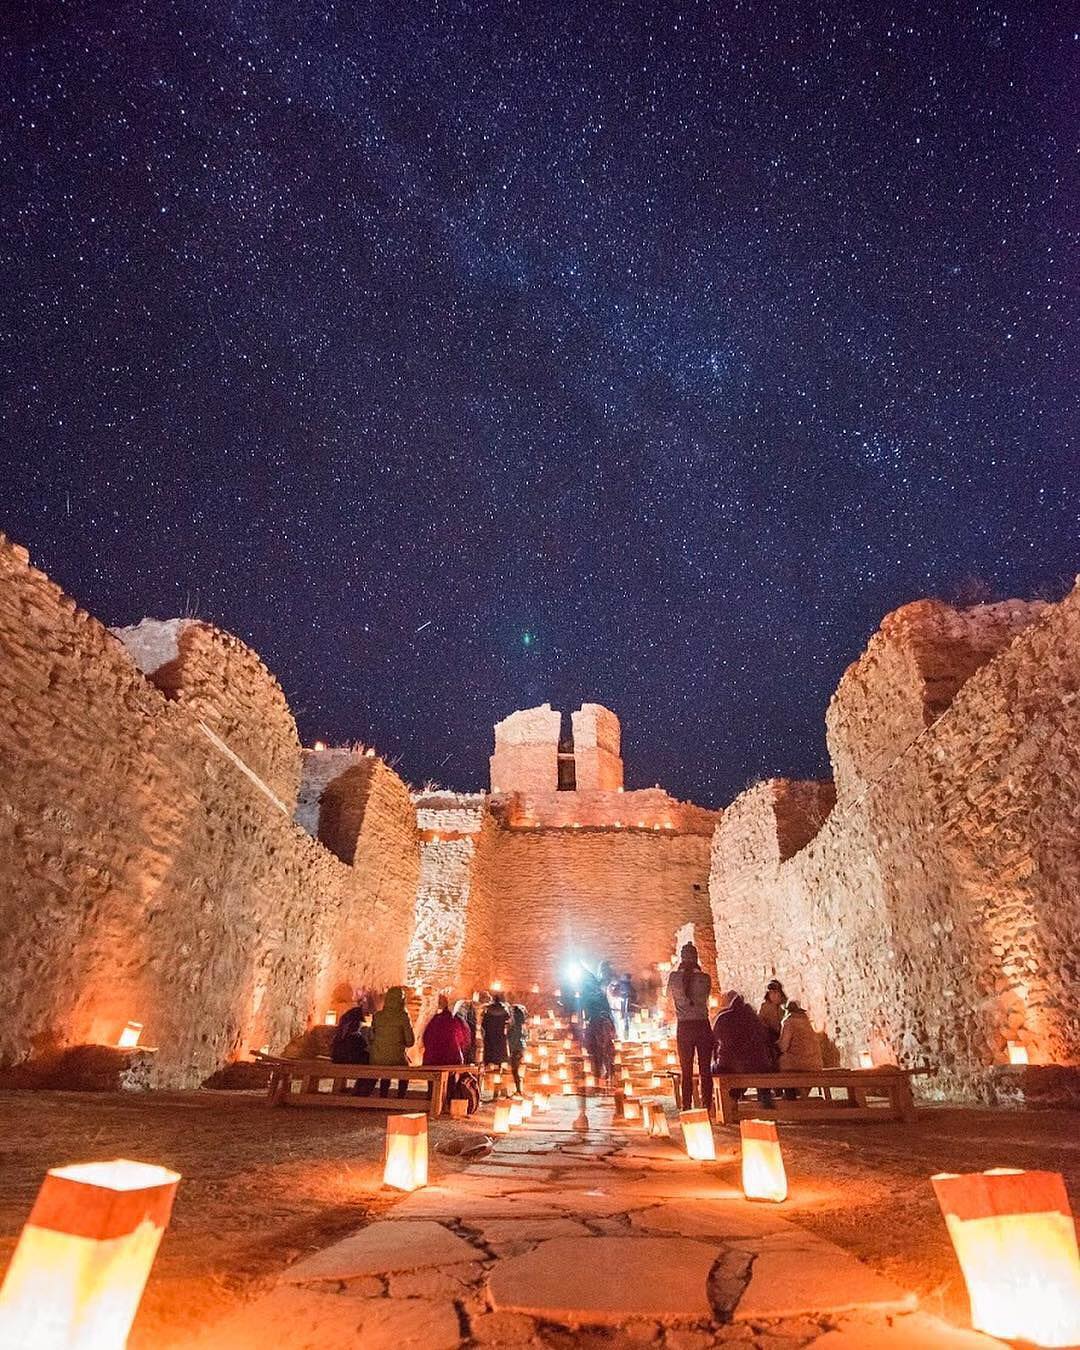 Visitors look at the clear night sky from inside the ruins of San José de los Mission Church. Photo by Instagram user @visitabq